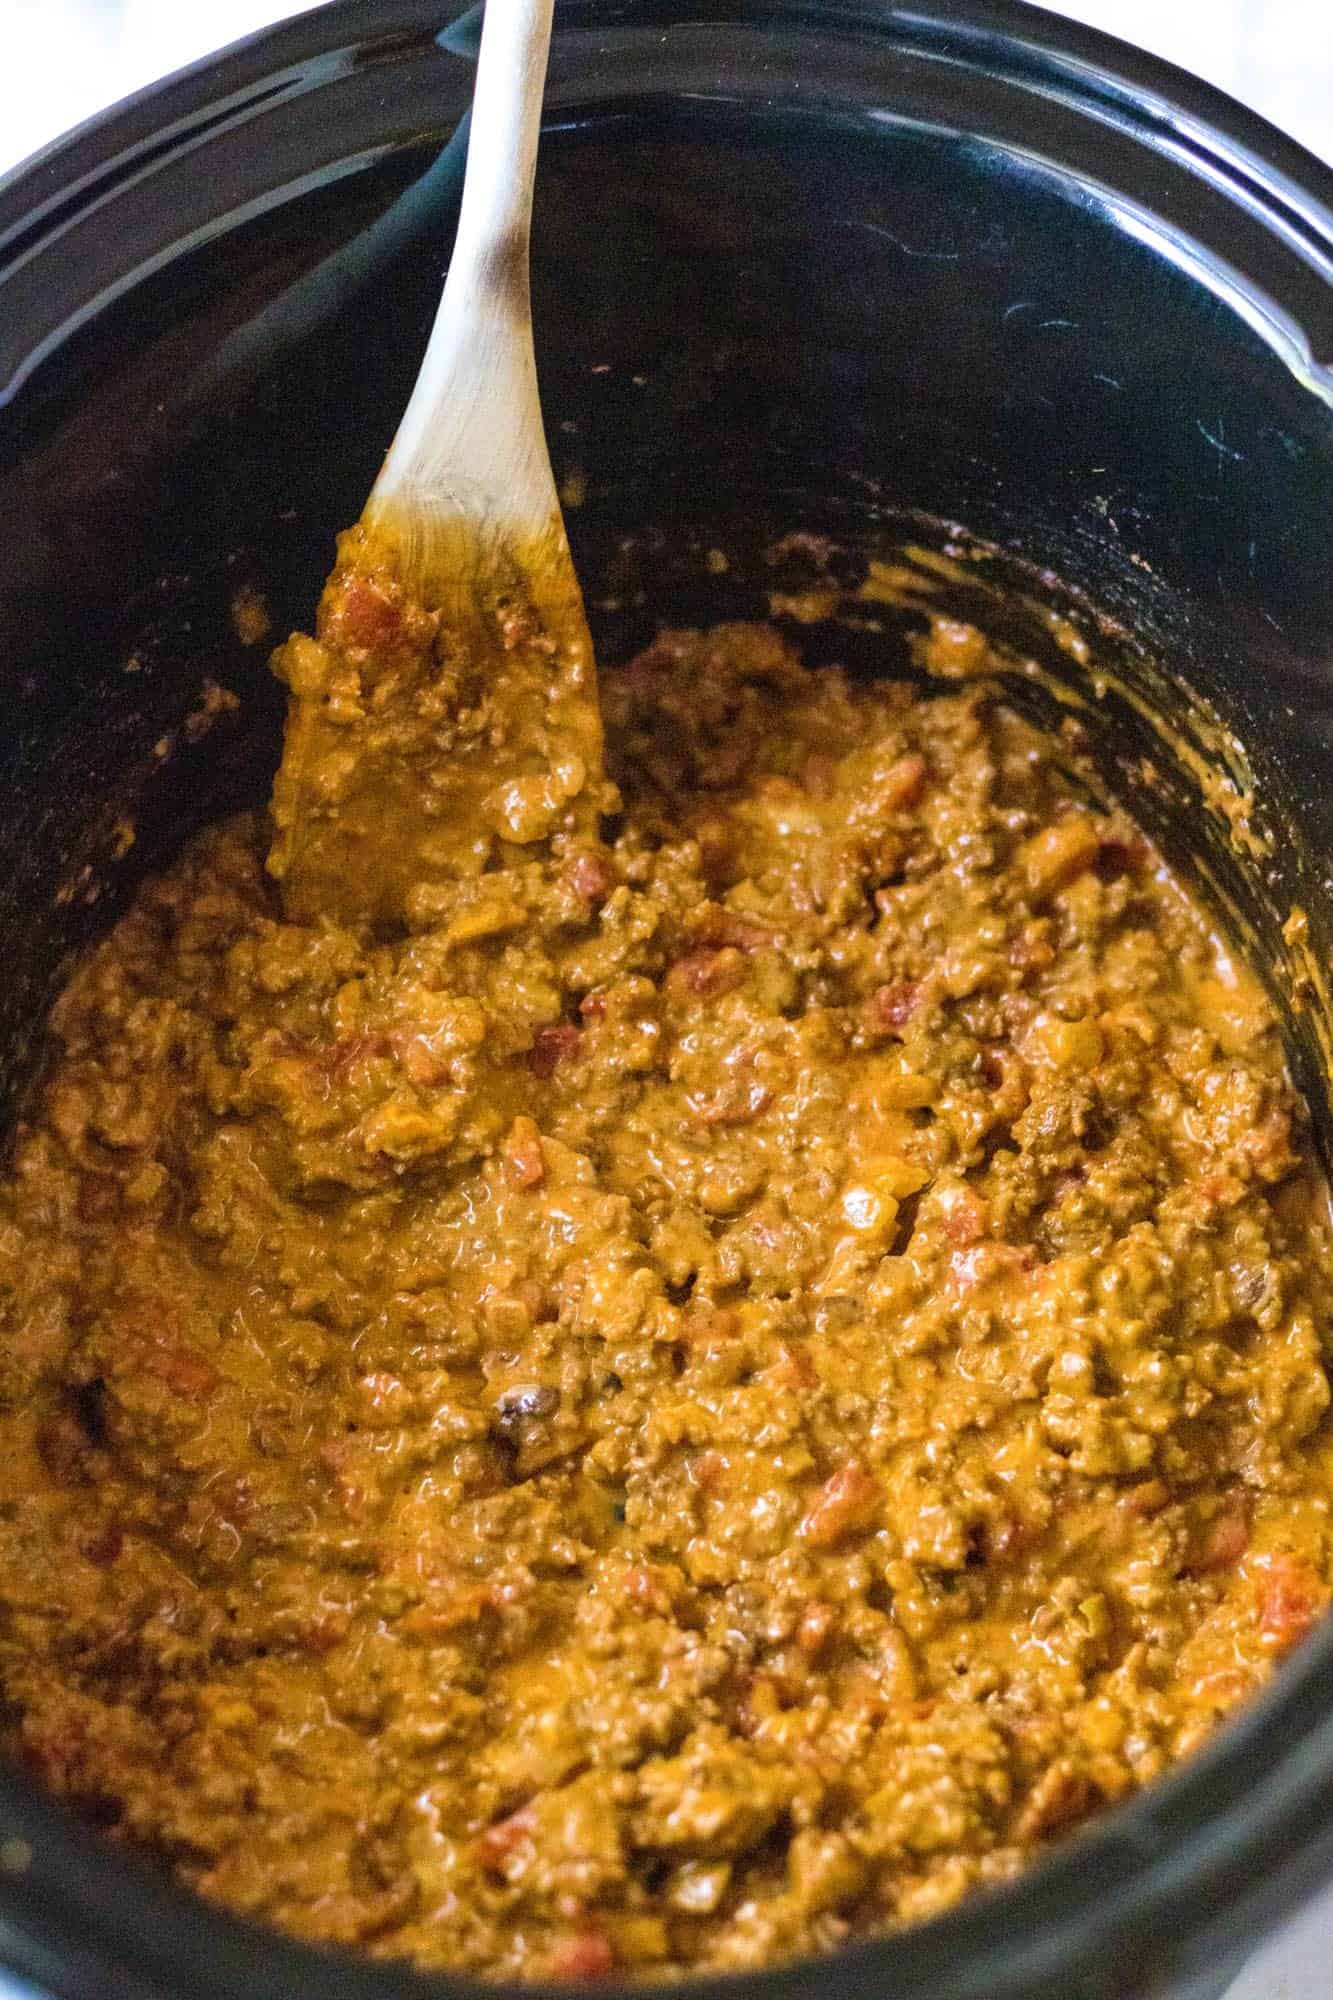 Nacho sloppy joes in a slow cooker.